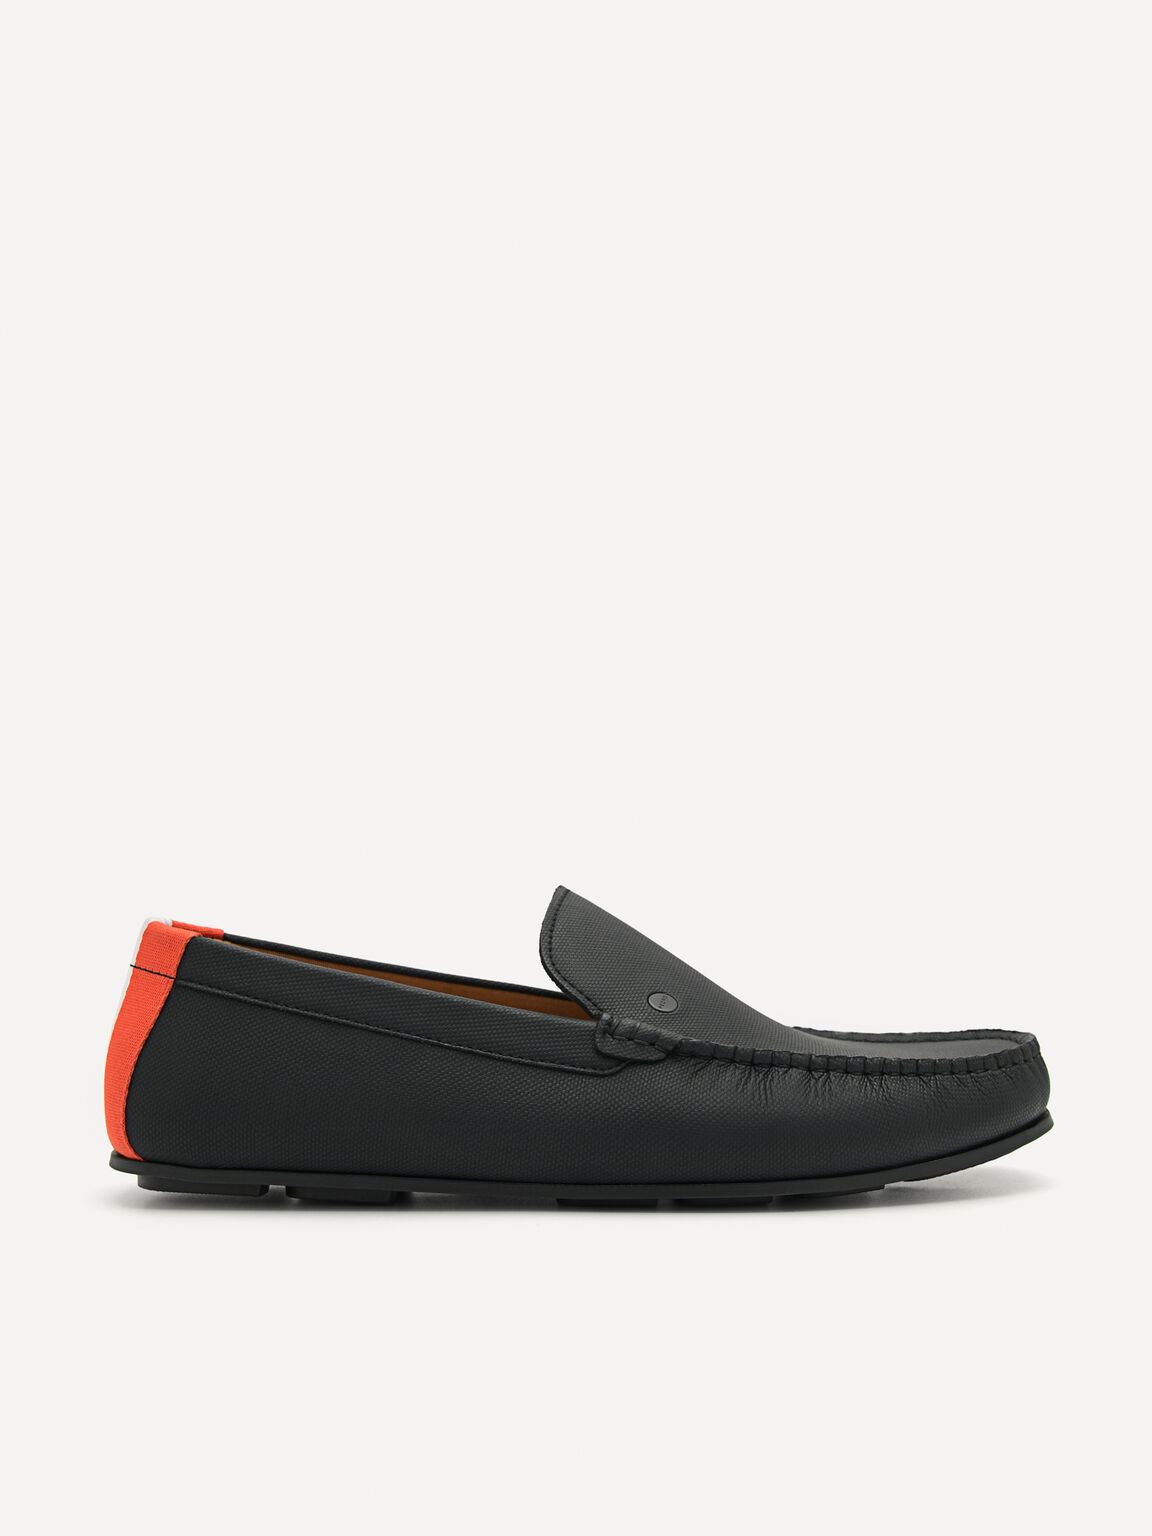 Leather & Fabric Slip-On Driving Shoes, Black